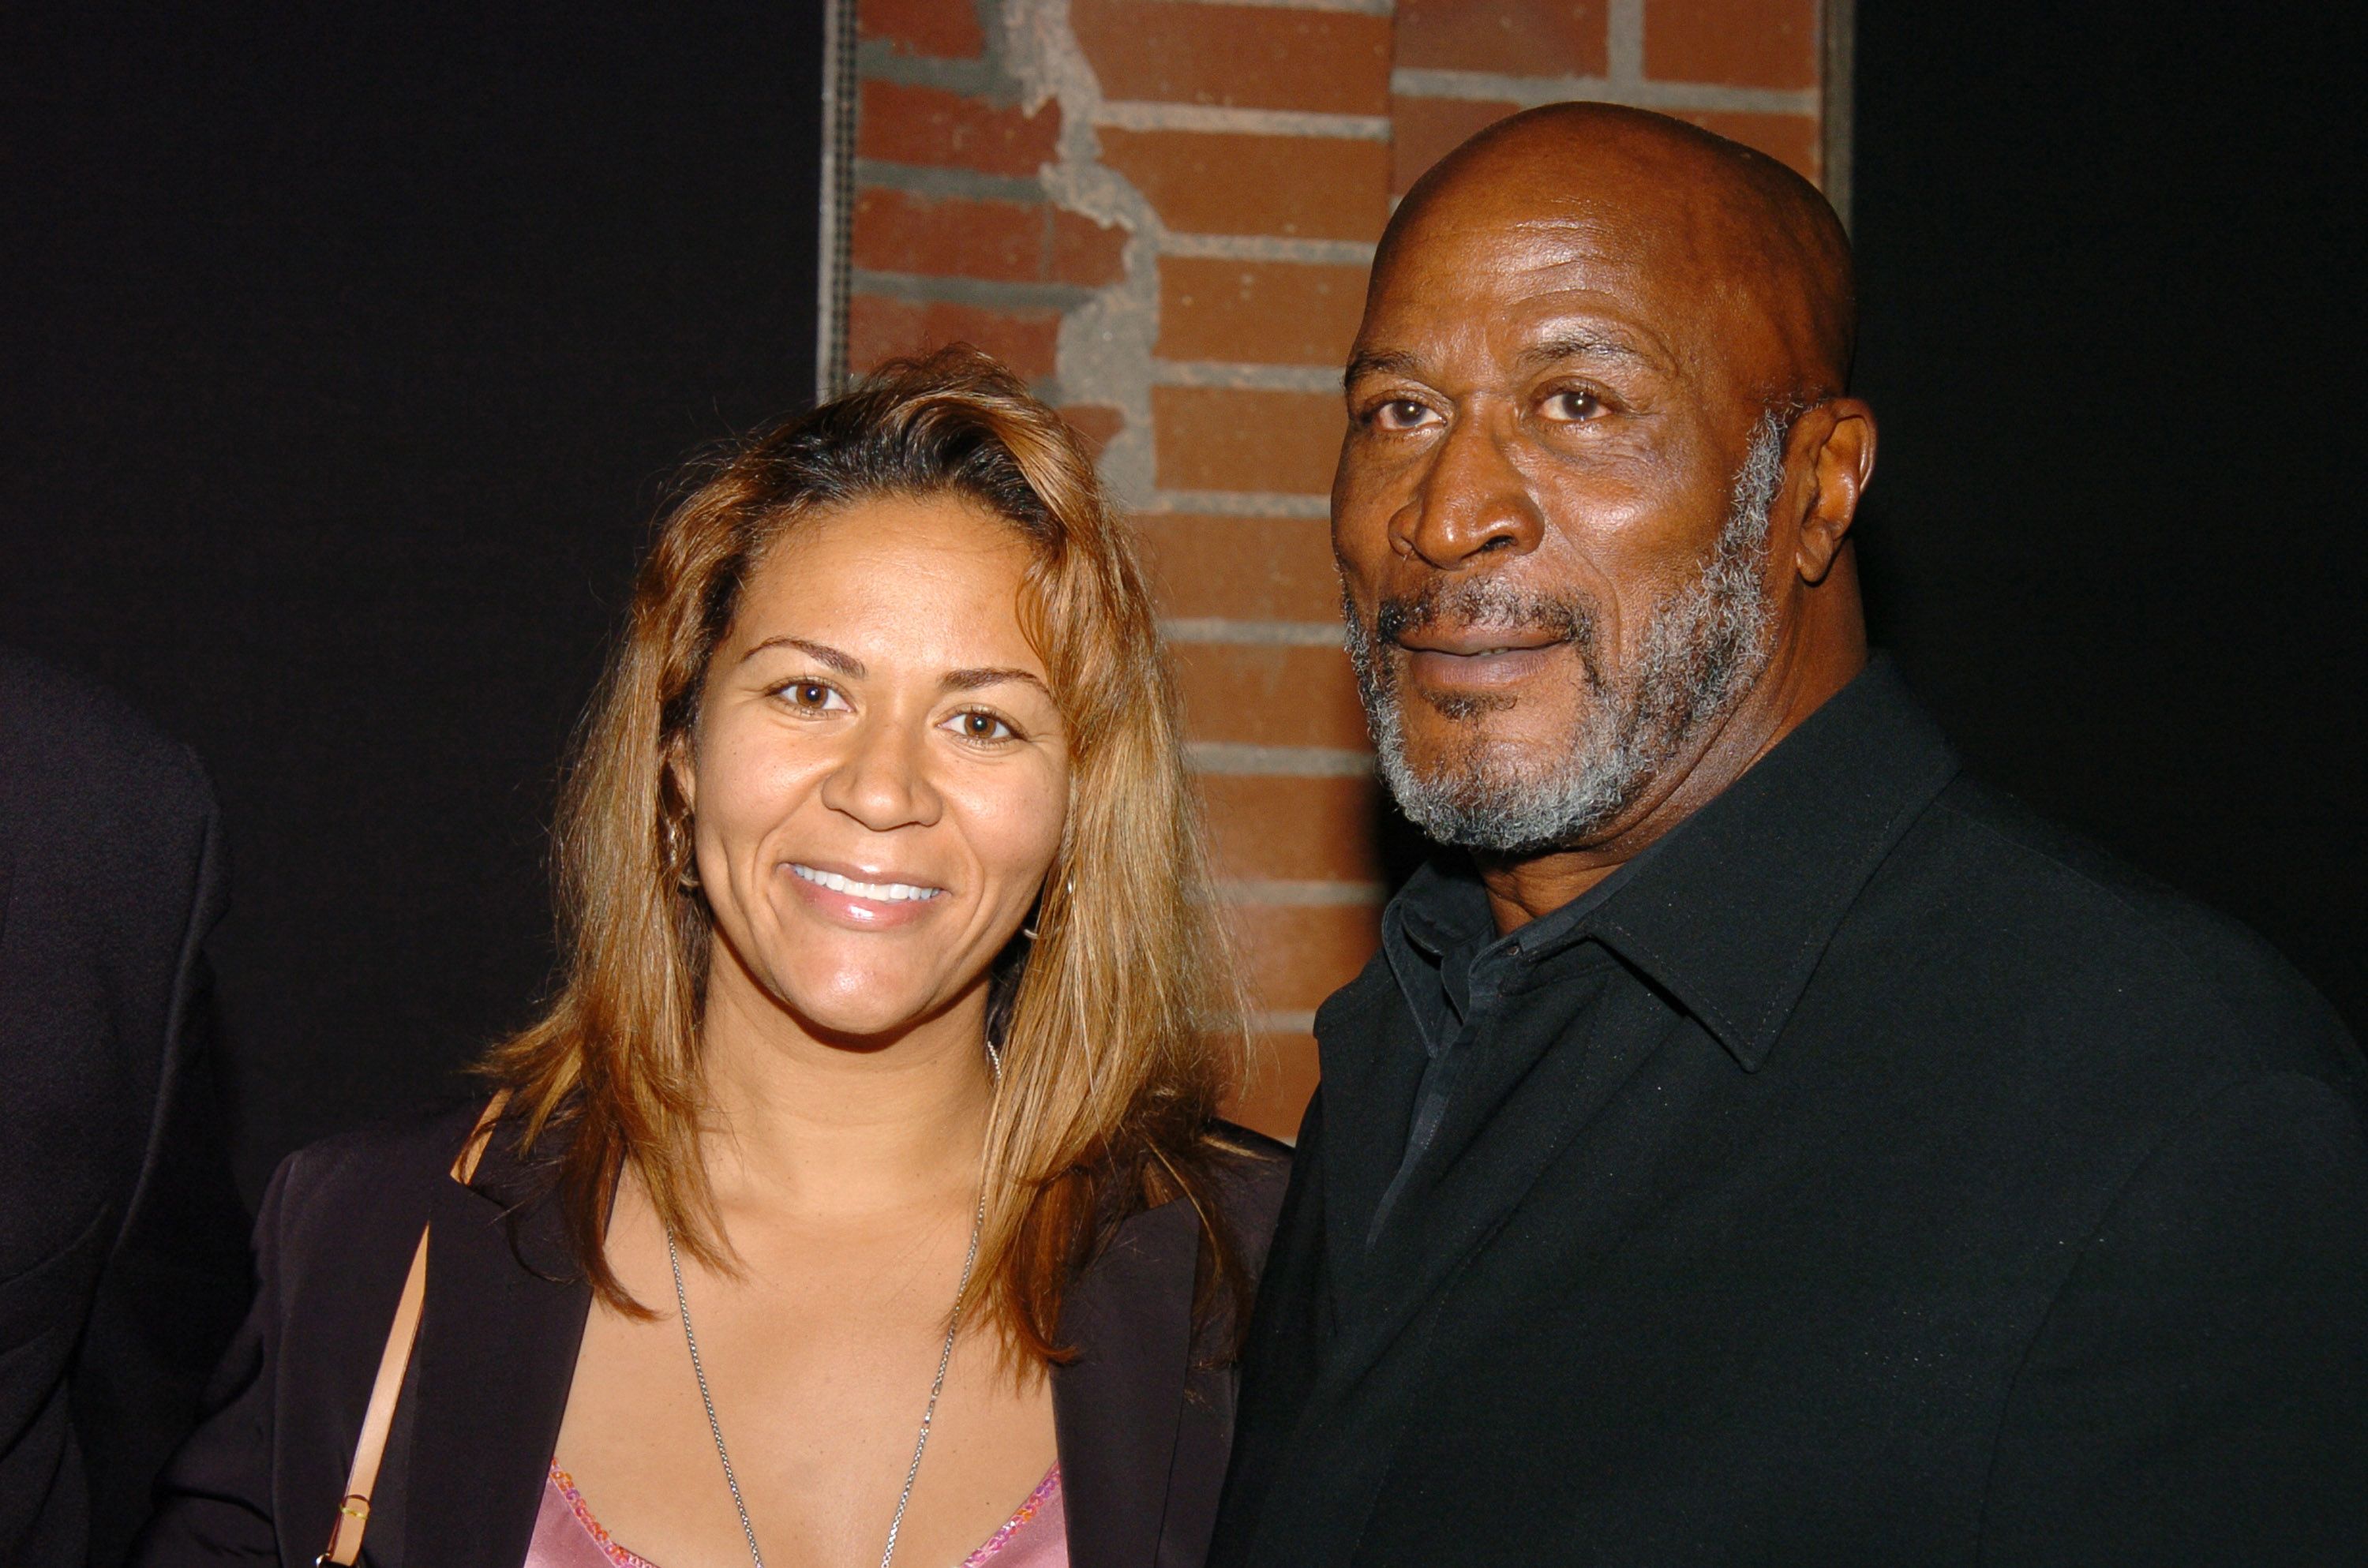 Actor John Amos and daughter Shannon attend the after-party of Cure Autism Now's celebration of the Third Annual "Acts of Love" on November 8, 2004 in Los Angeles, California. | Photo: Getty Images